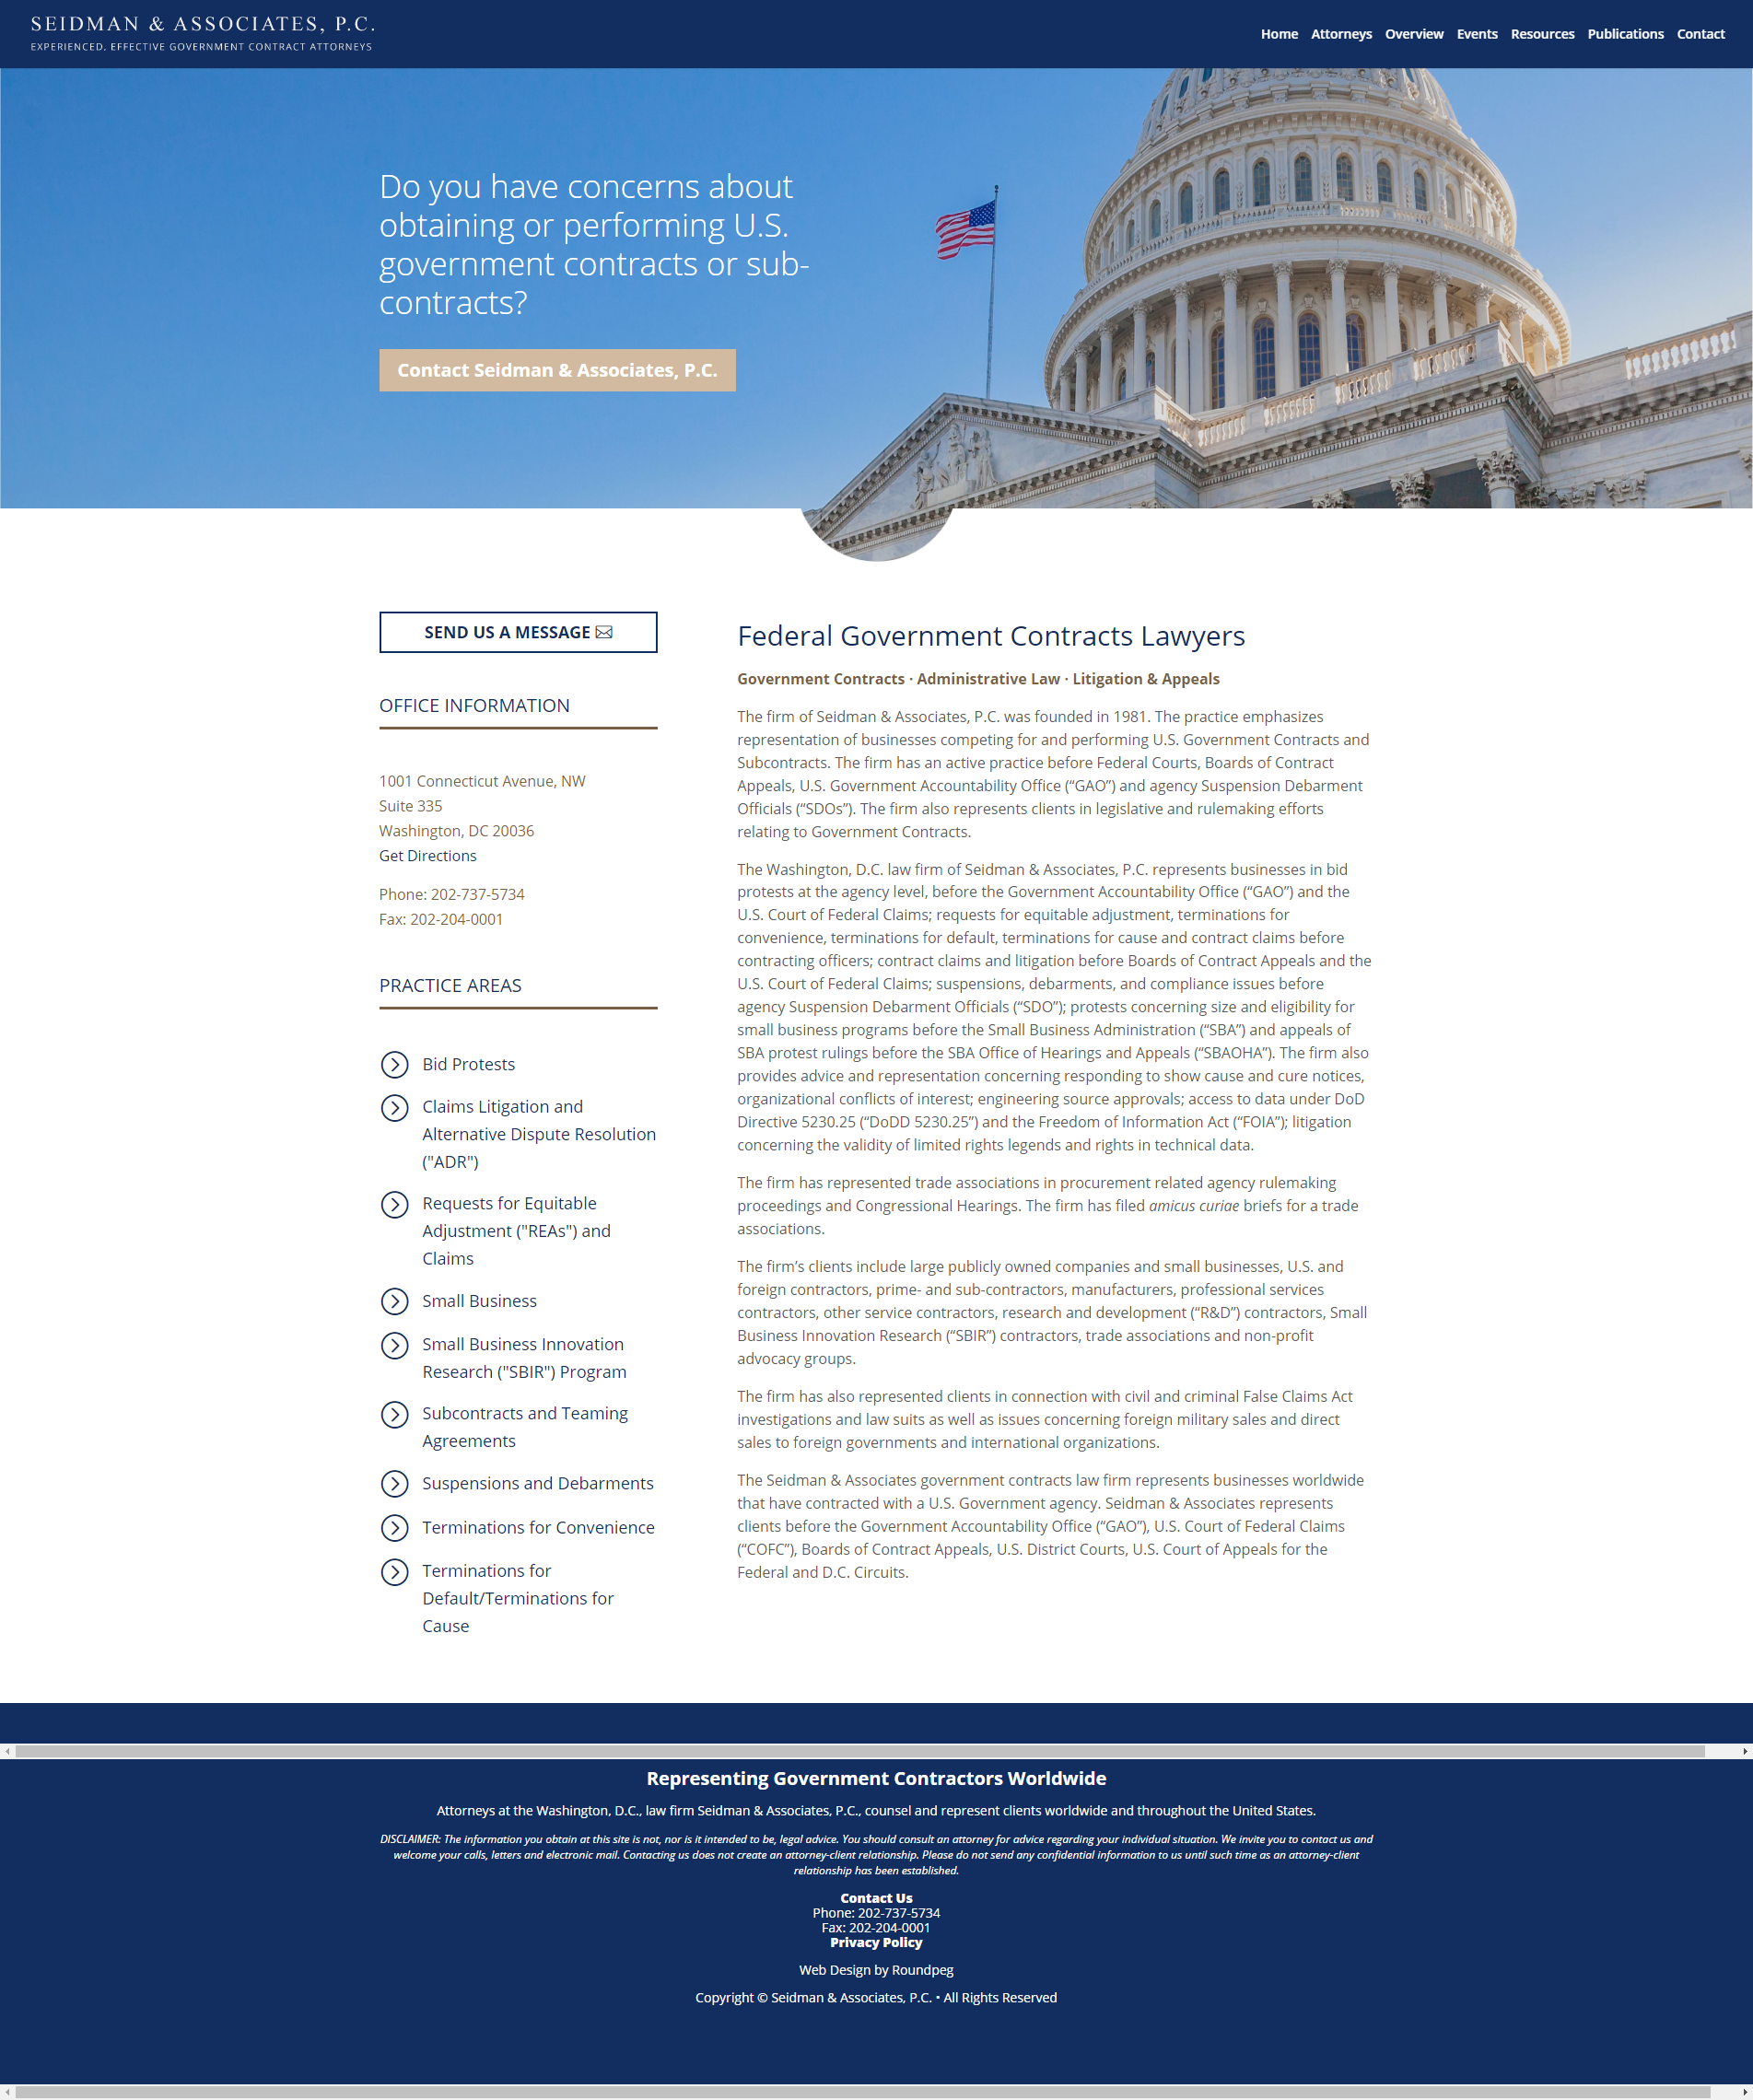 Federal Government Contracts Lawyers Seidman Associates, law firm web design